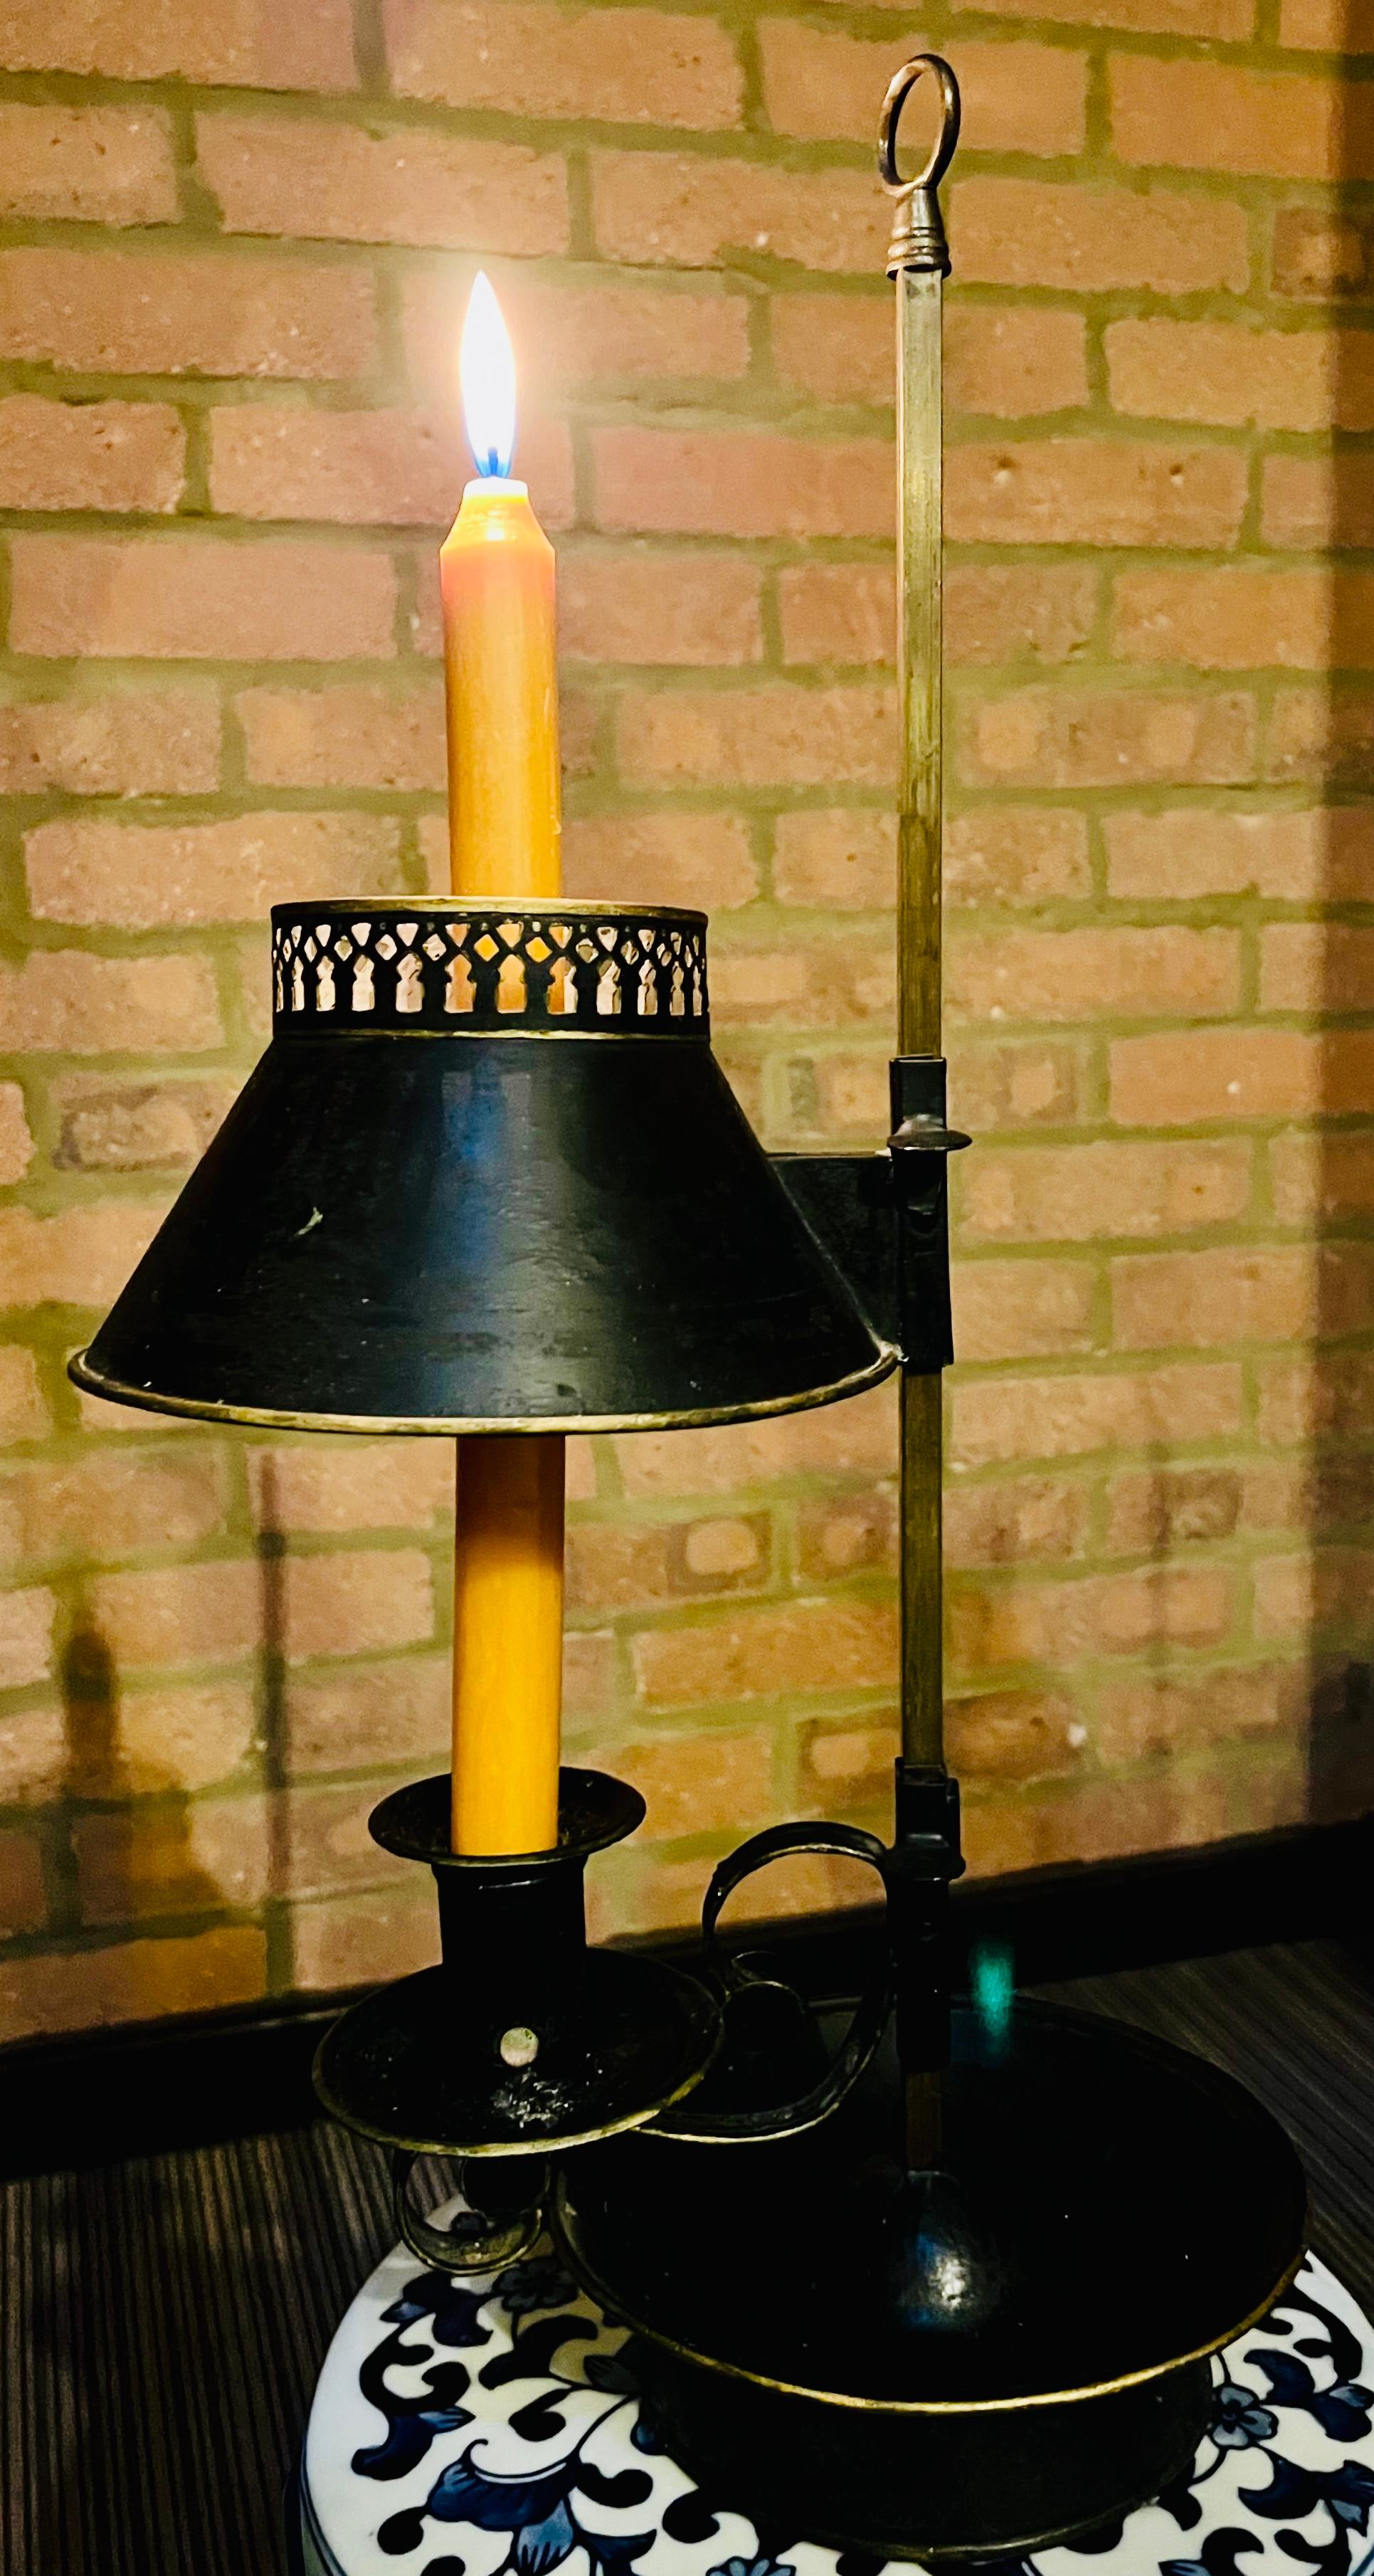 Circa 1820 French 19th Century Regency Period Candlestick Tole Bouillotte Lamp For Sale 3